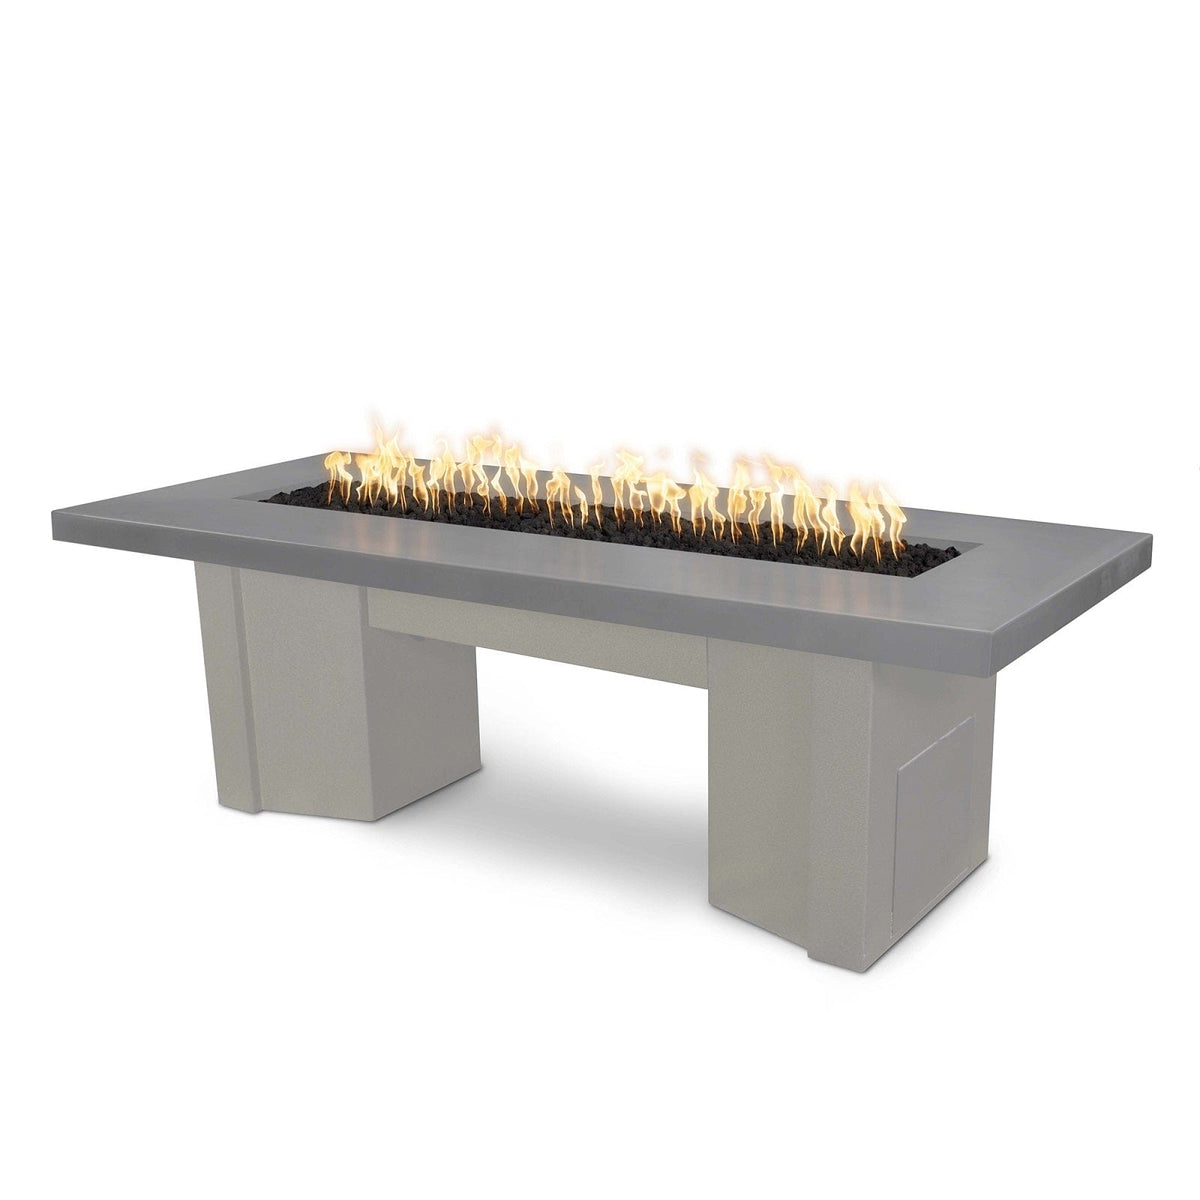 The Outdoor Plus Fire Features Natural Gray (-NGY) / Pewter Powder Coated Steel (-PEW) The Outdoor Plus 78&quot; Alameda Fire Table Smooth Concrete in Natural Gas - 110V Plug &amp; Play Electronic Ignition / OPT-ALMGFRC78EKIT-NG